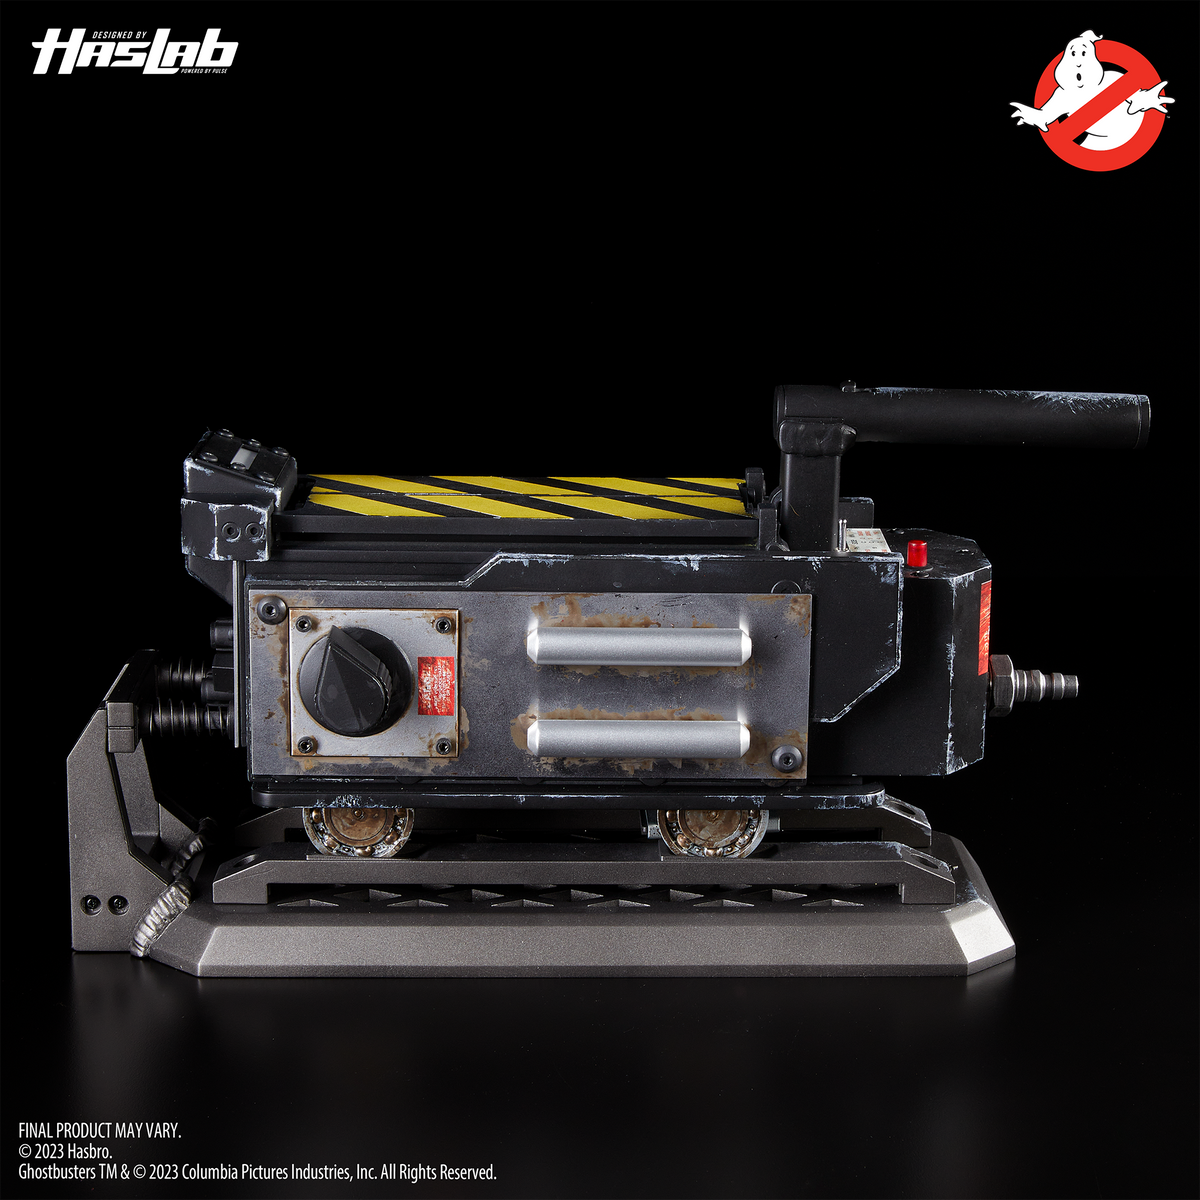 Ghostbusters Plasma Series HasLab Two in the Box! Ghost Trap and P.K.E.  Meter